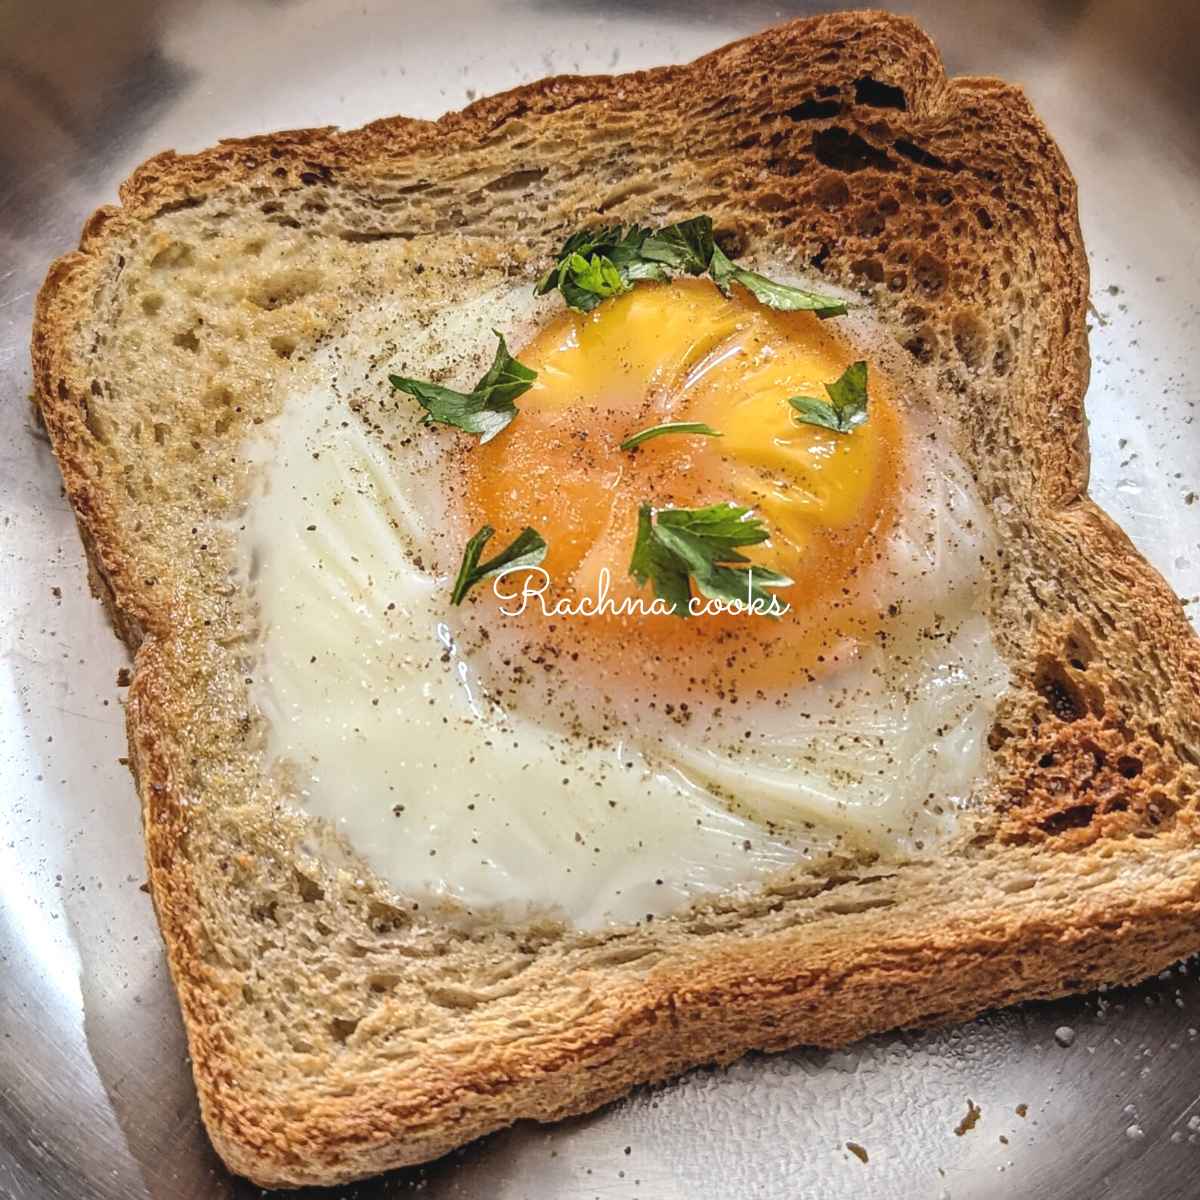 Toasted bread with egg in the center